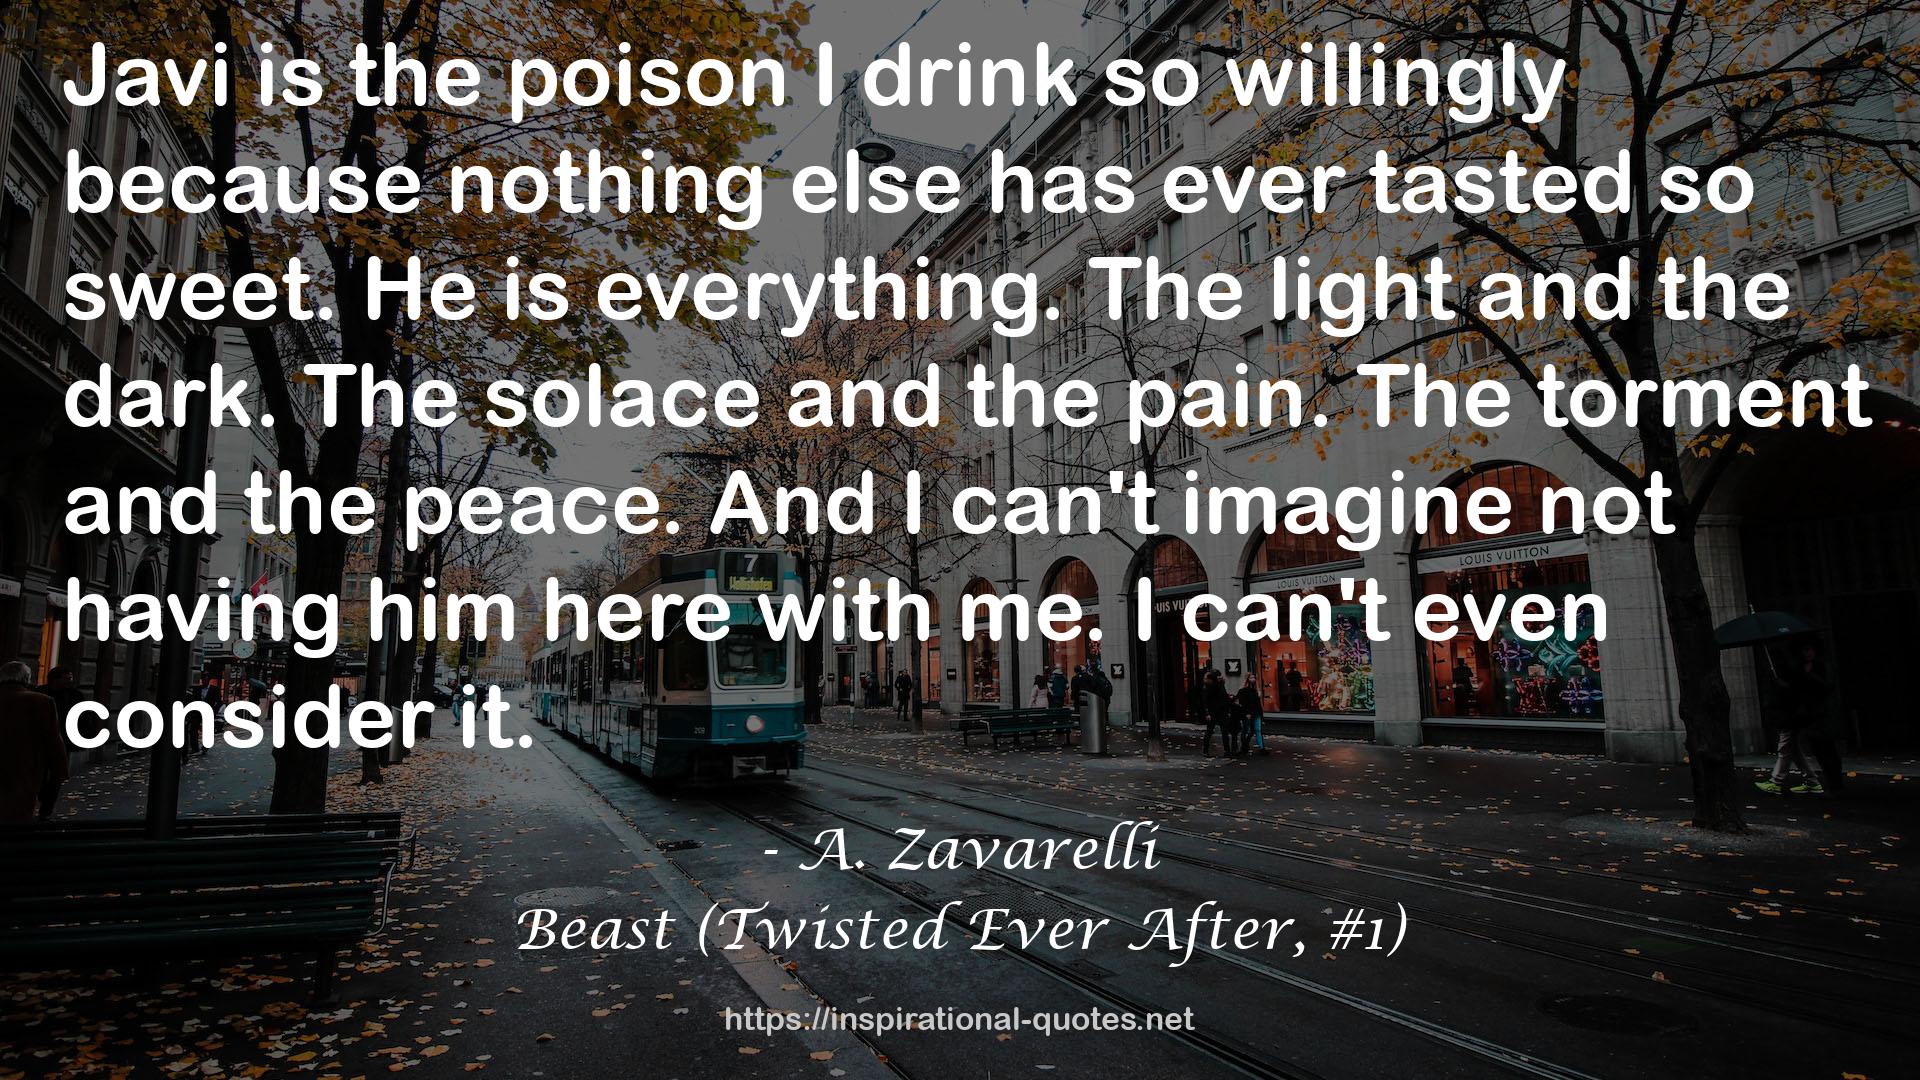 Beast (Twisted Ever After, #1) QUOTES